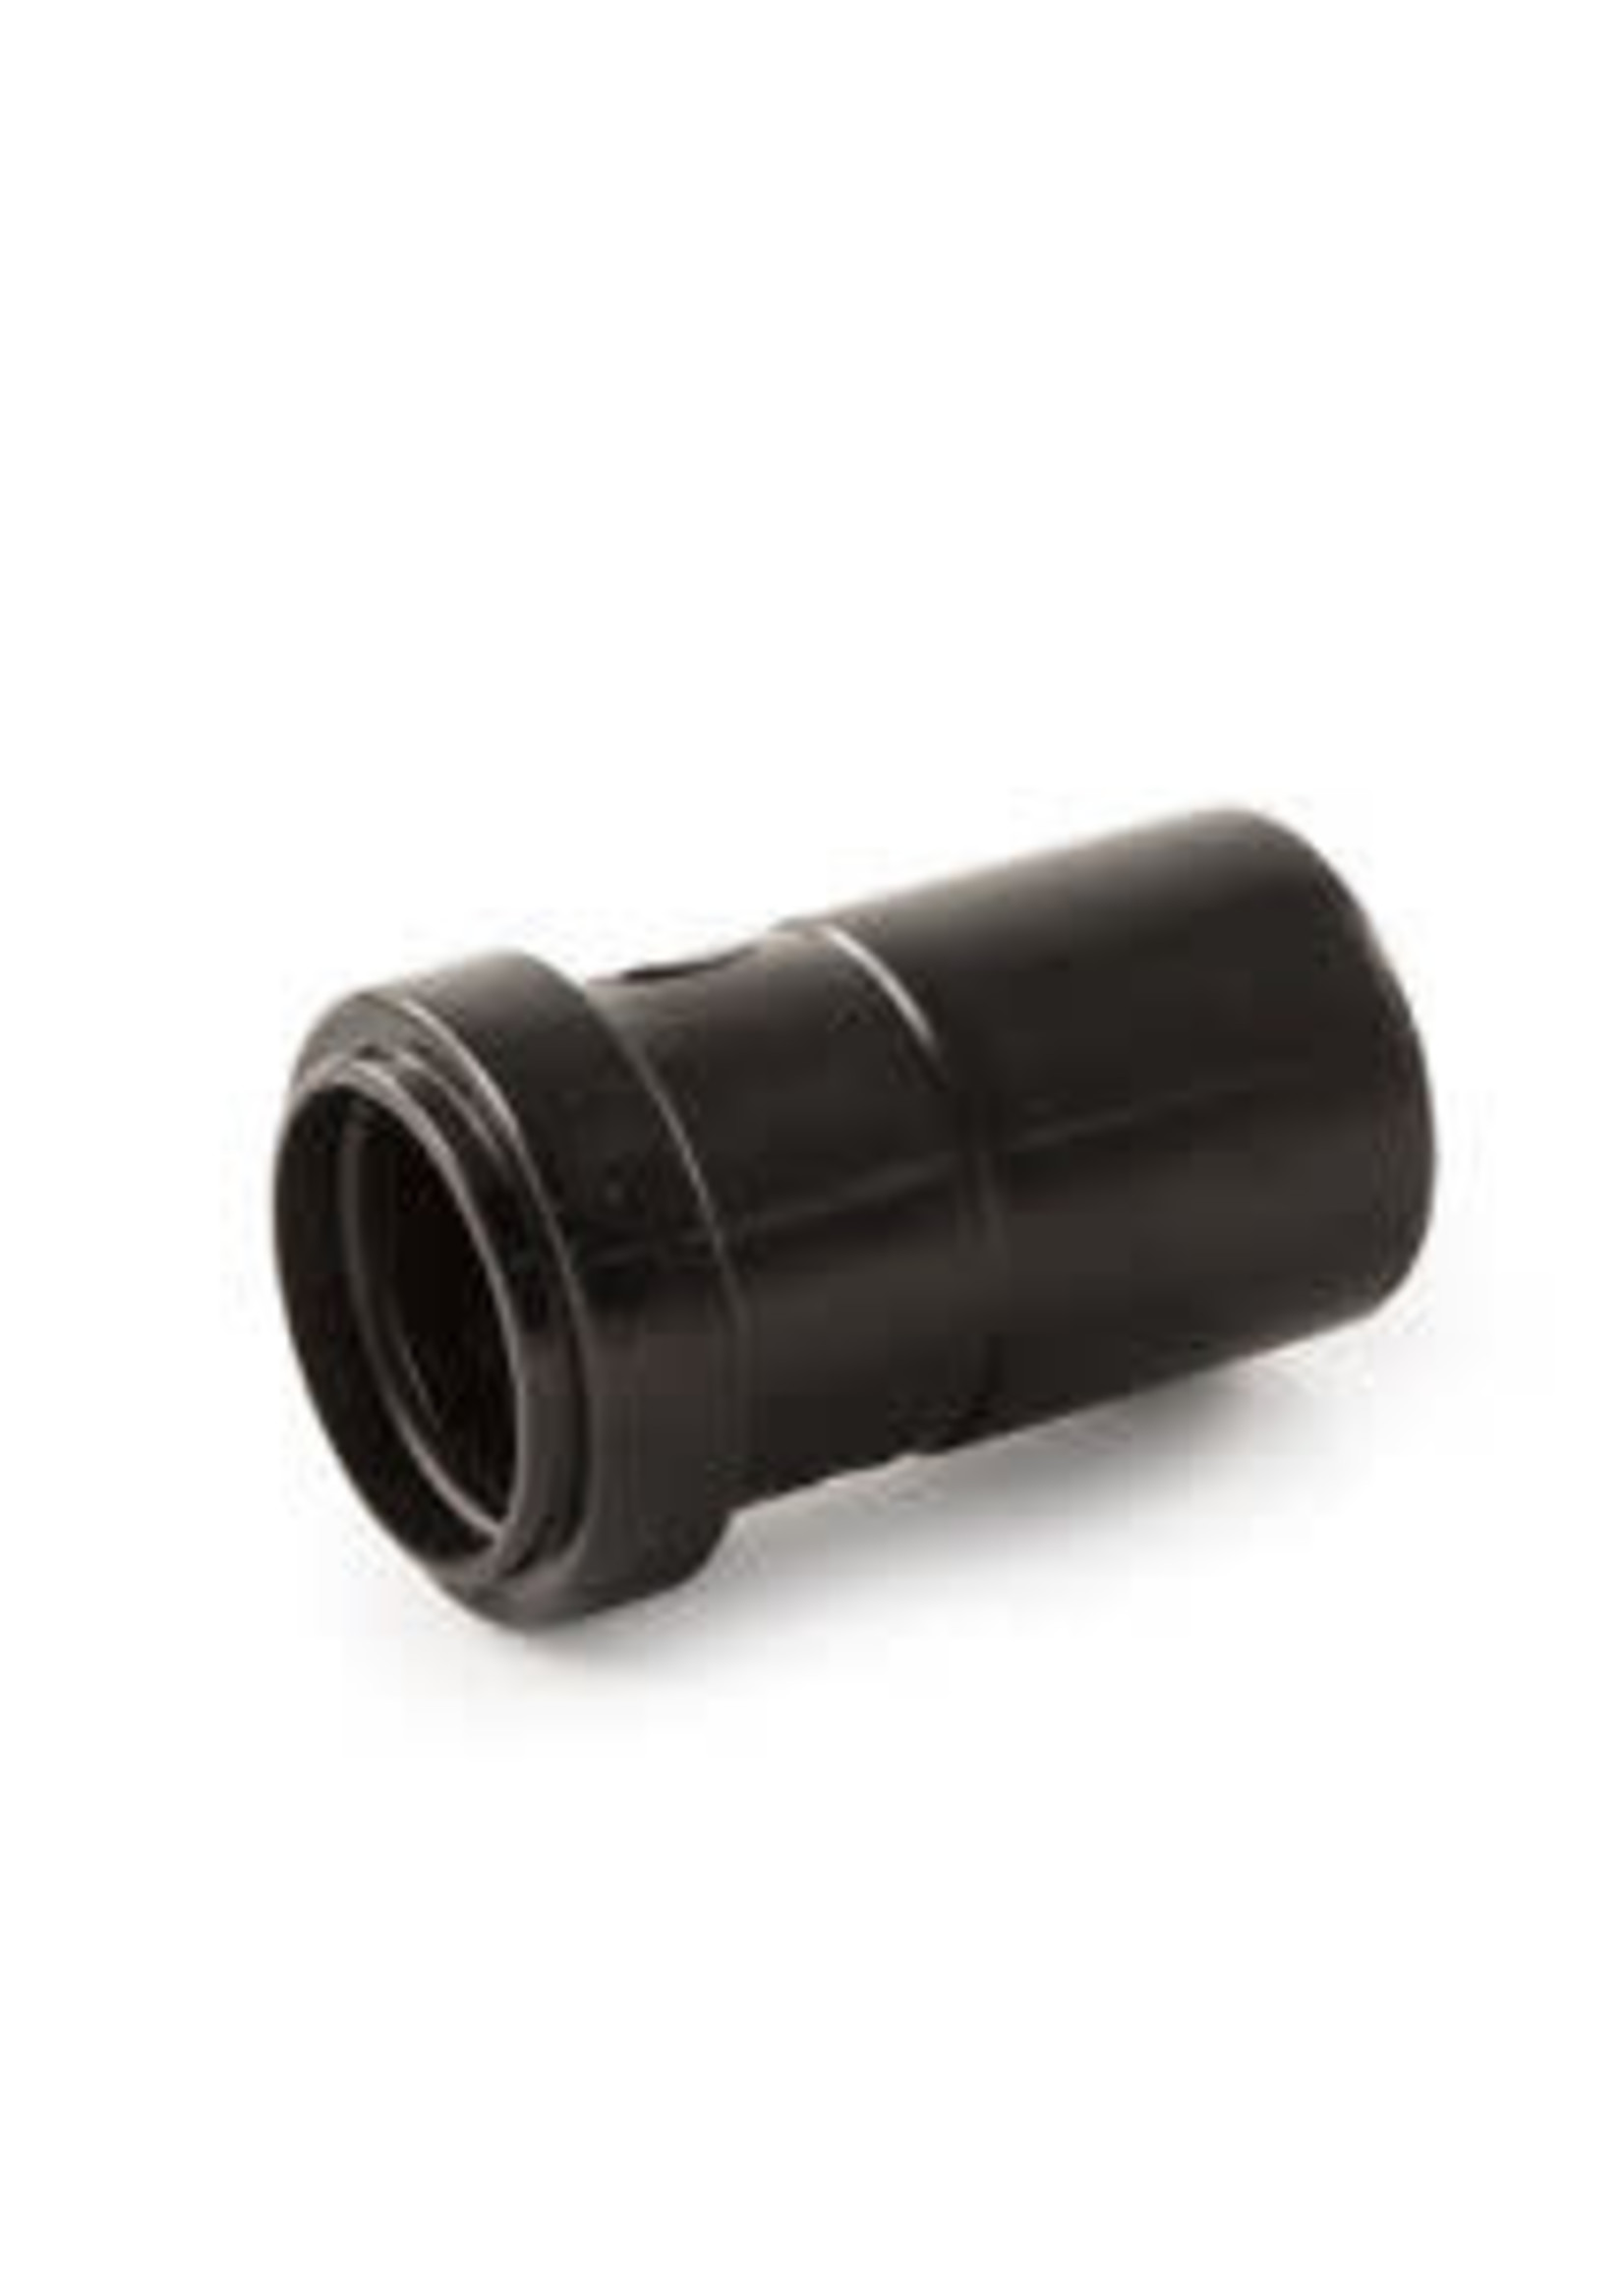 Polypipe Push Fit Reducer 32mm Black